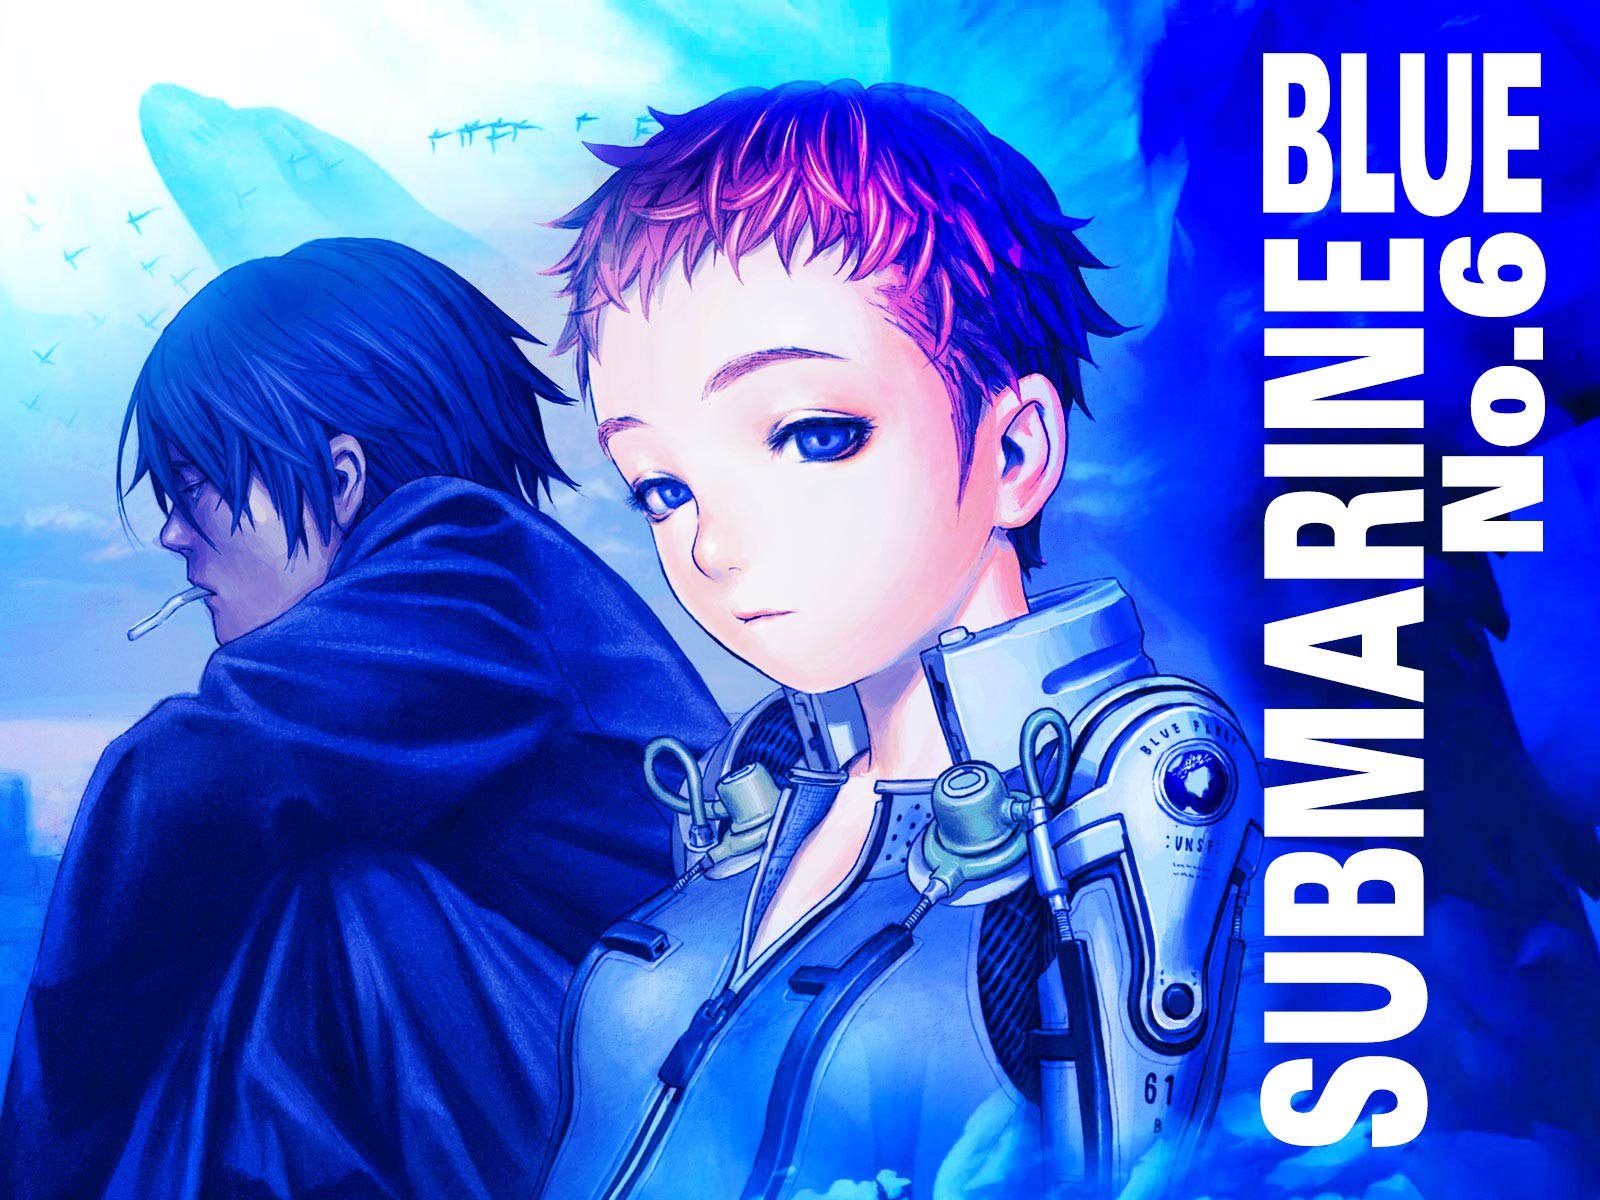 Blue Submarine No.6 Wallpapers